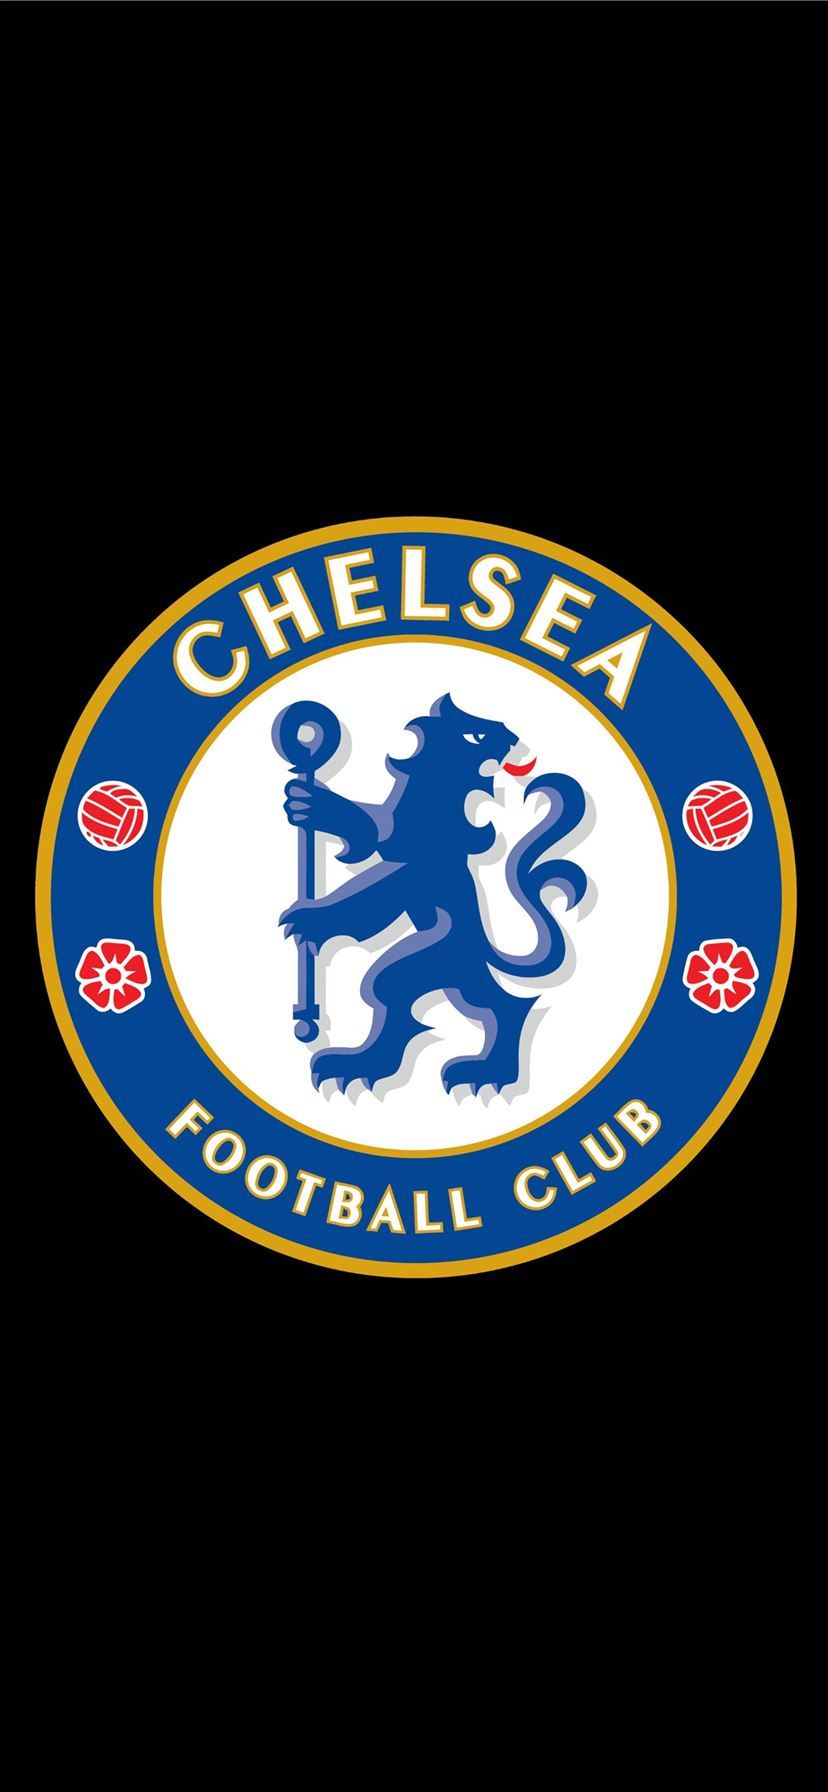 Chelsea Football Club Chelsea Fc HD background iPhone X Wallpaper Free Download